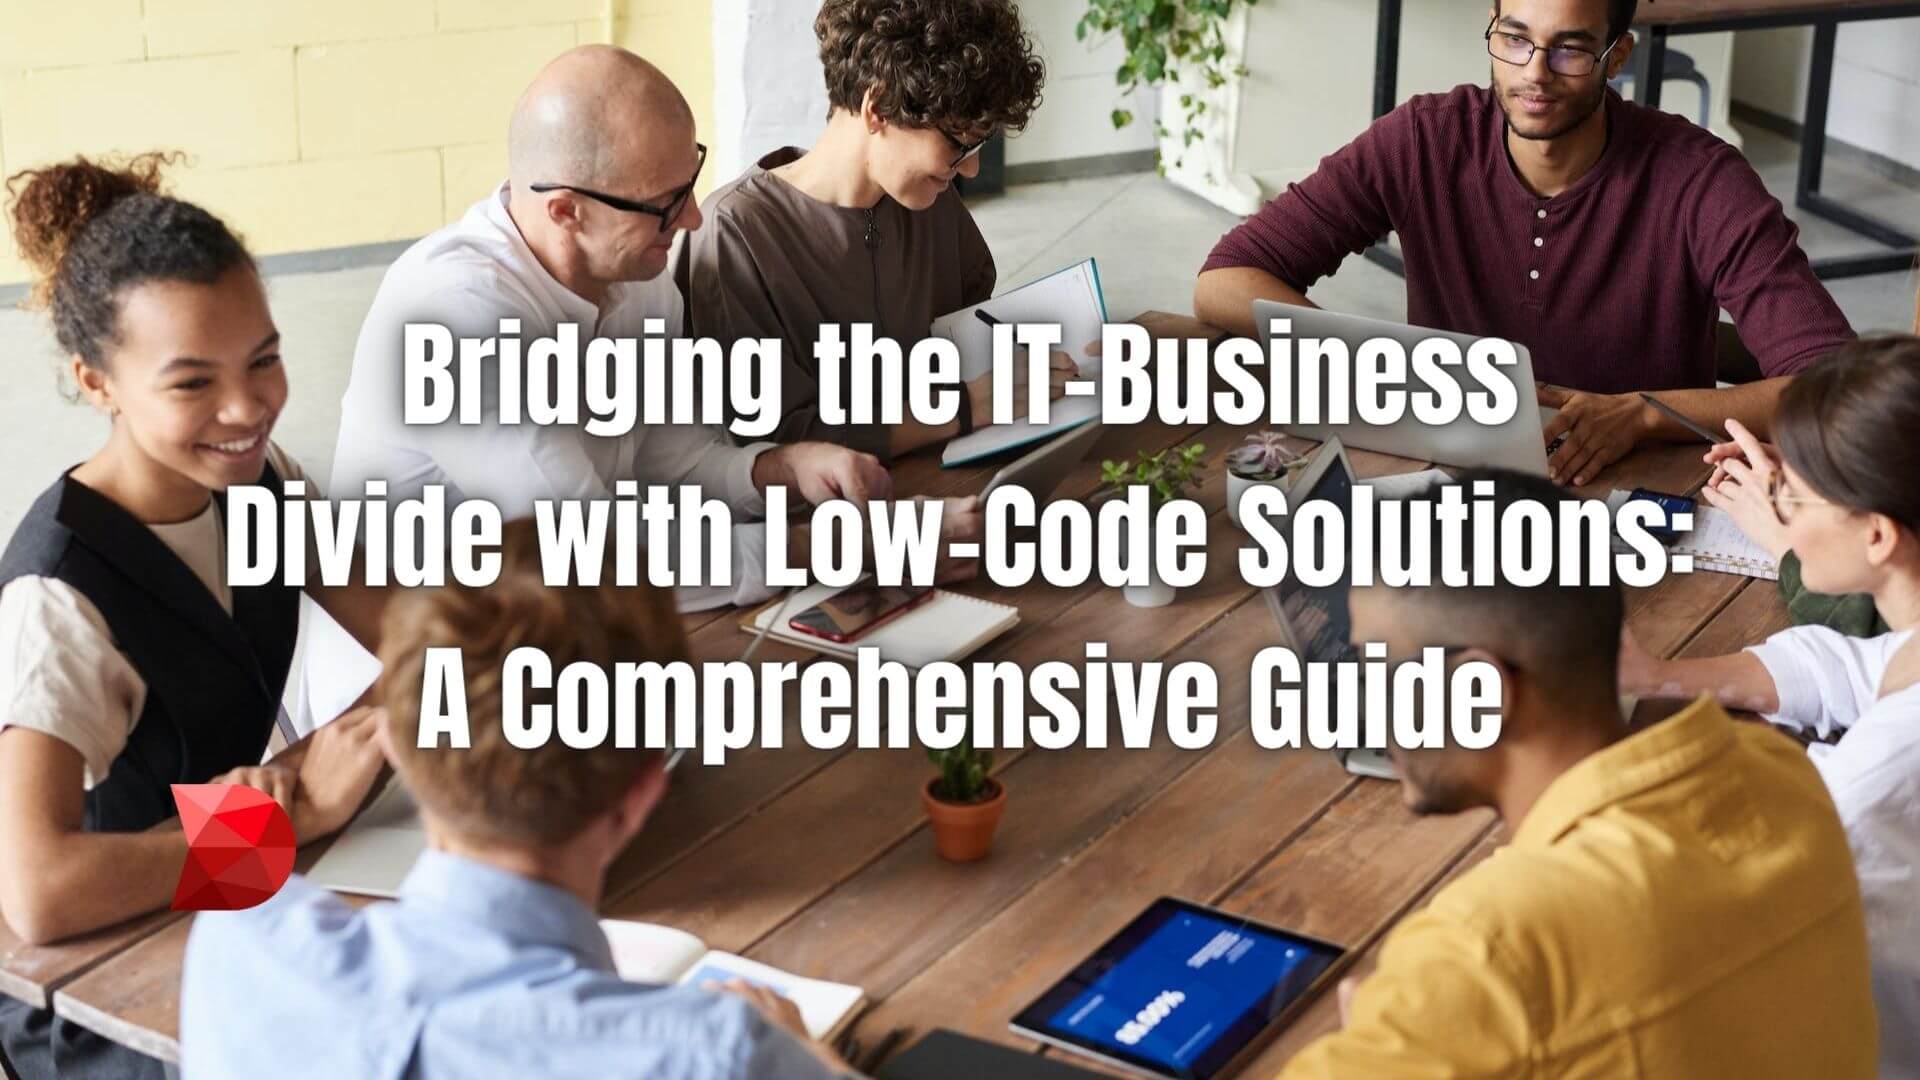 Bridge the gap effortlessly! Click here to discover the ultimate guide to leveraging low-code for seamless IT-business alignment.